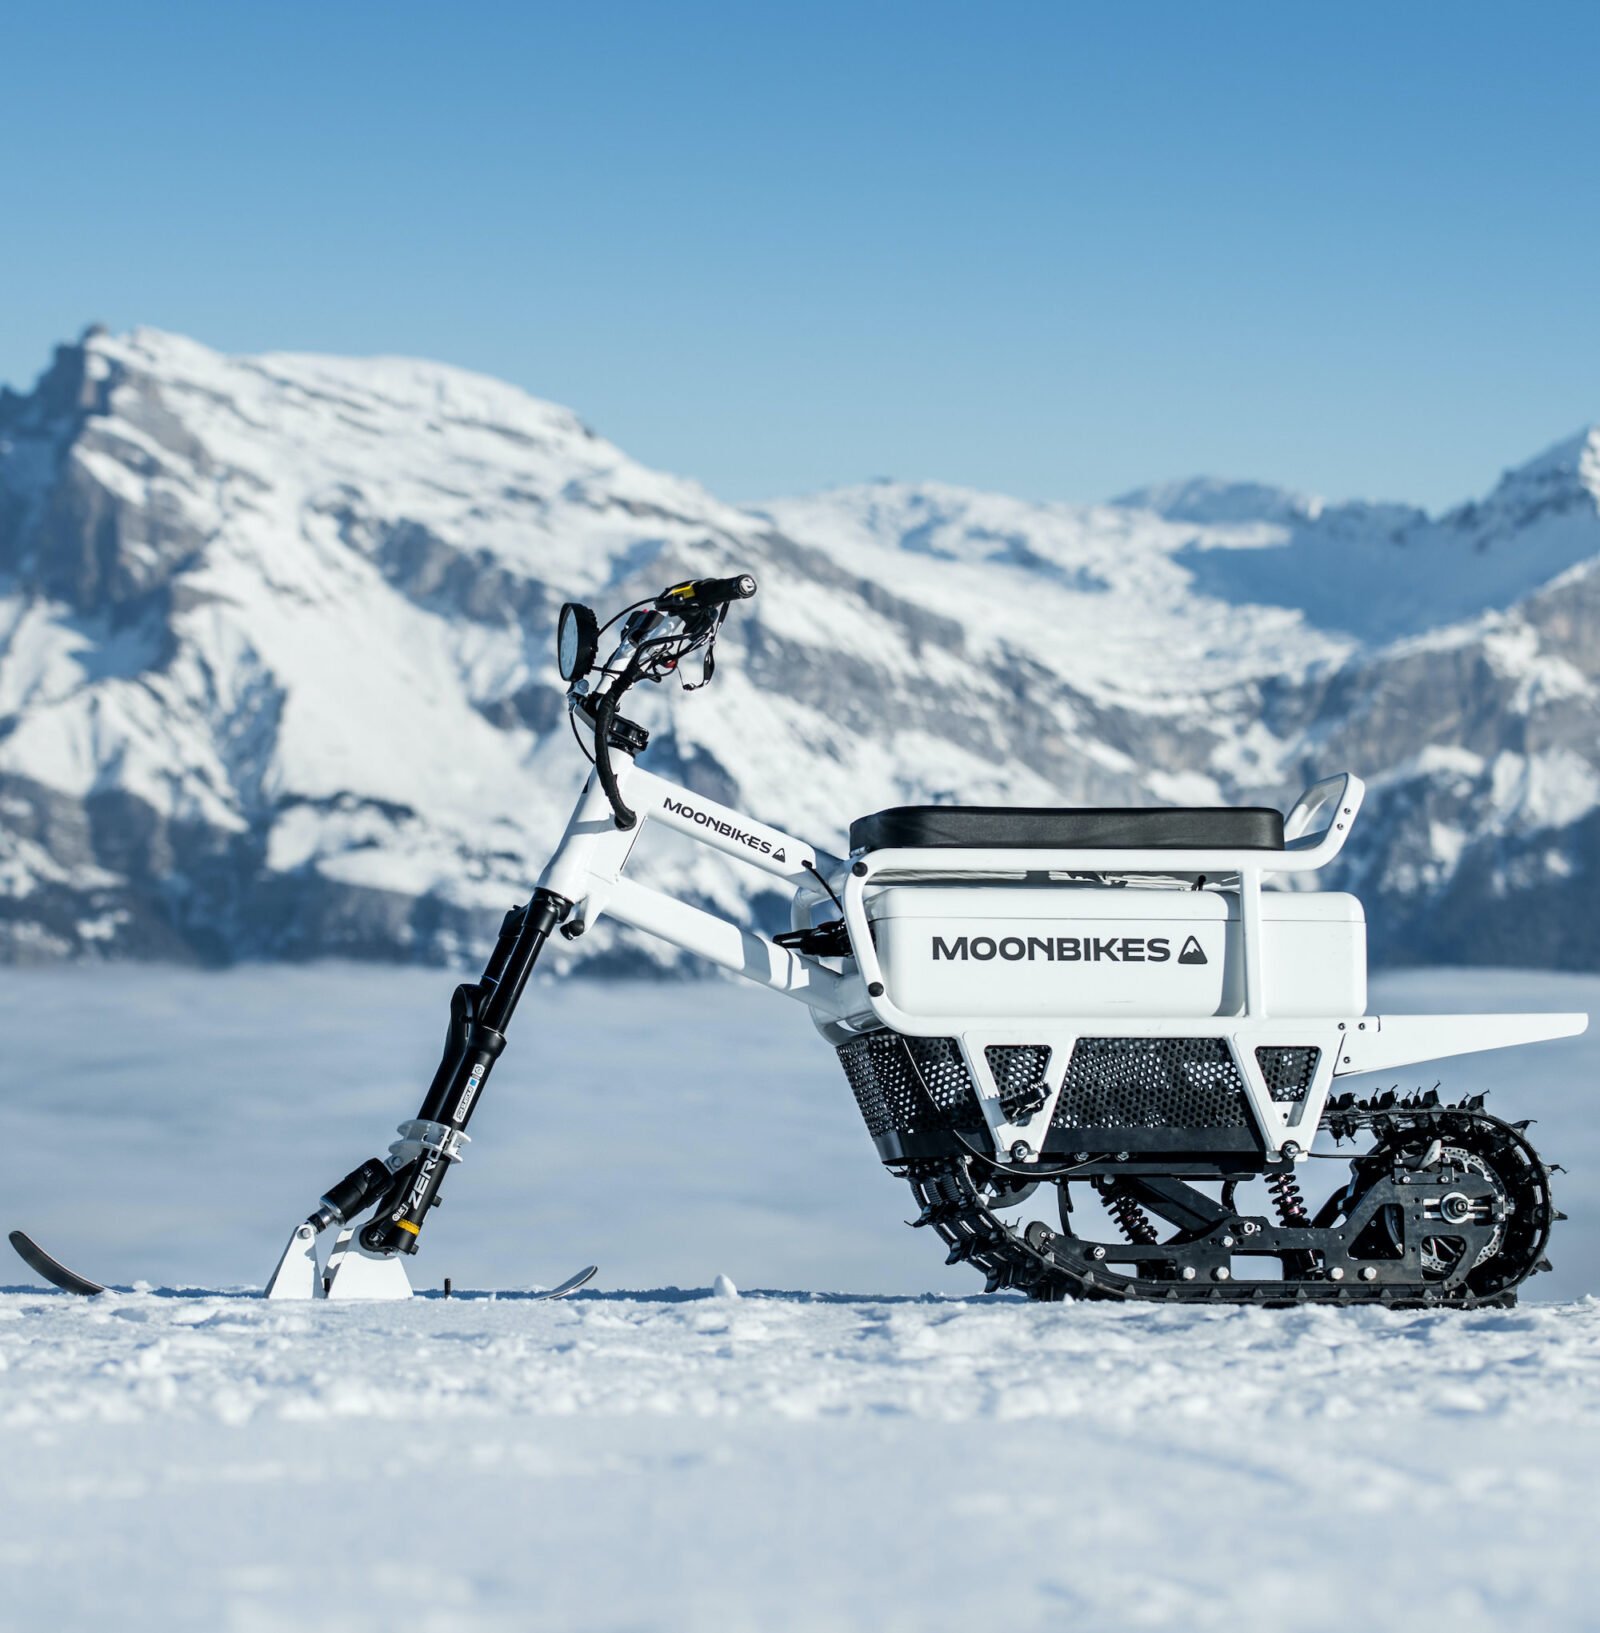 MoonBikes The World's First Electric Snow Bikes